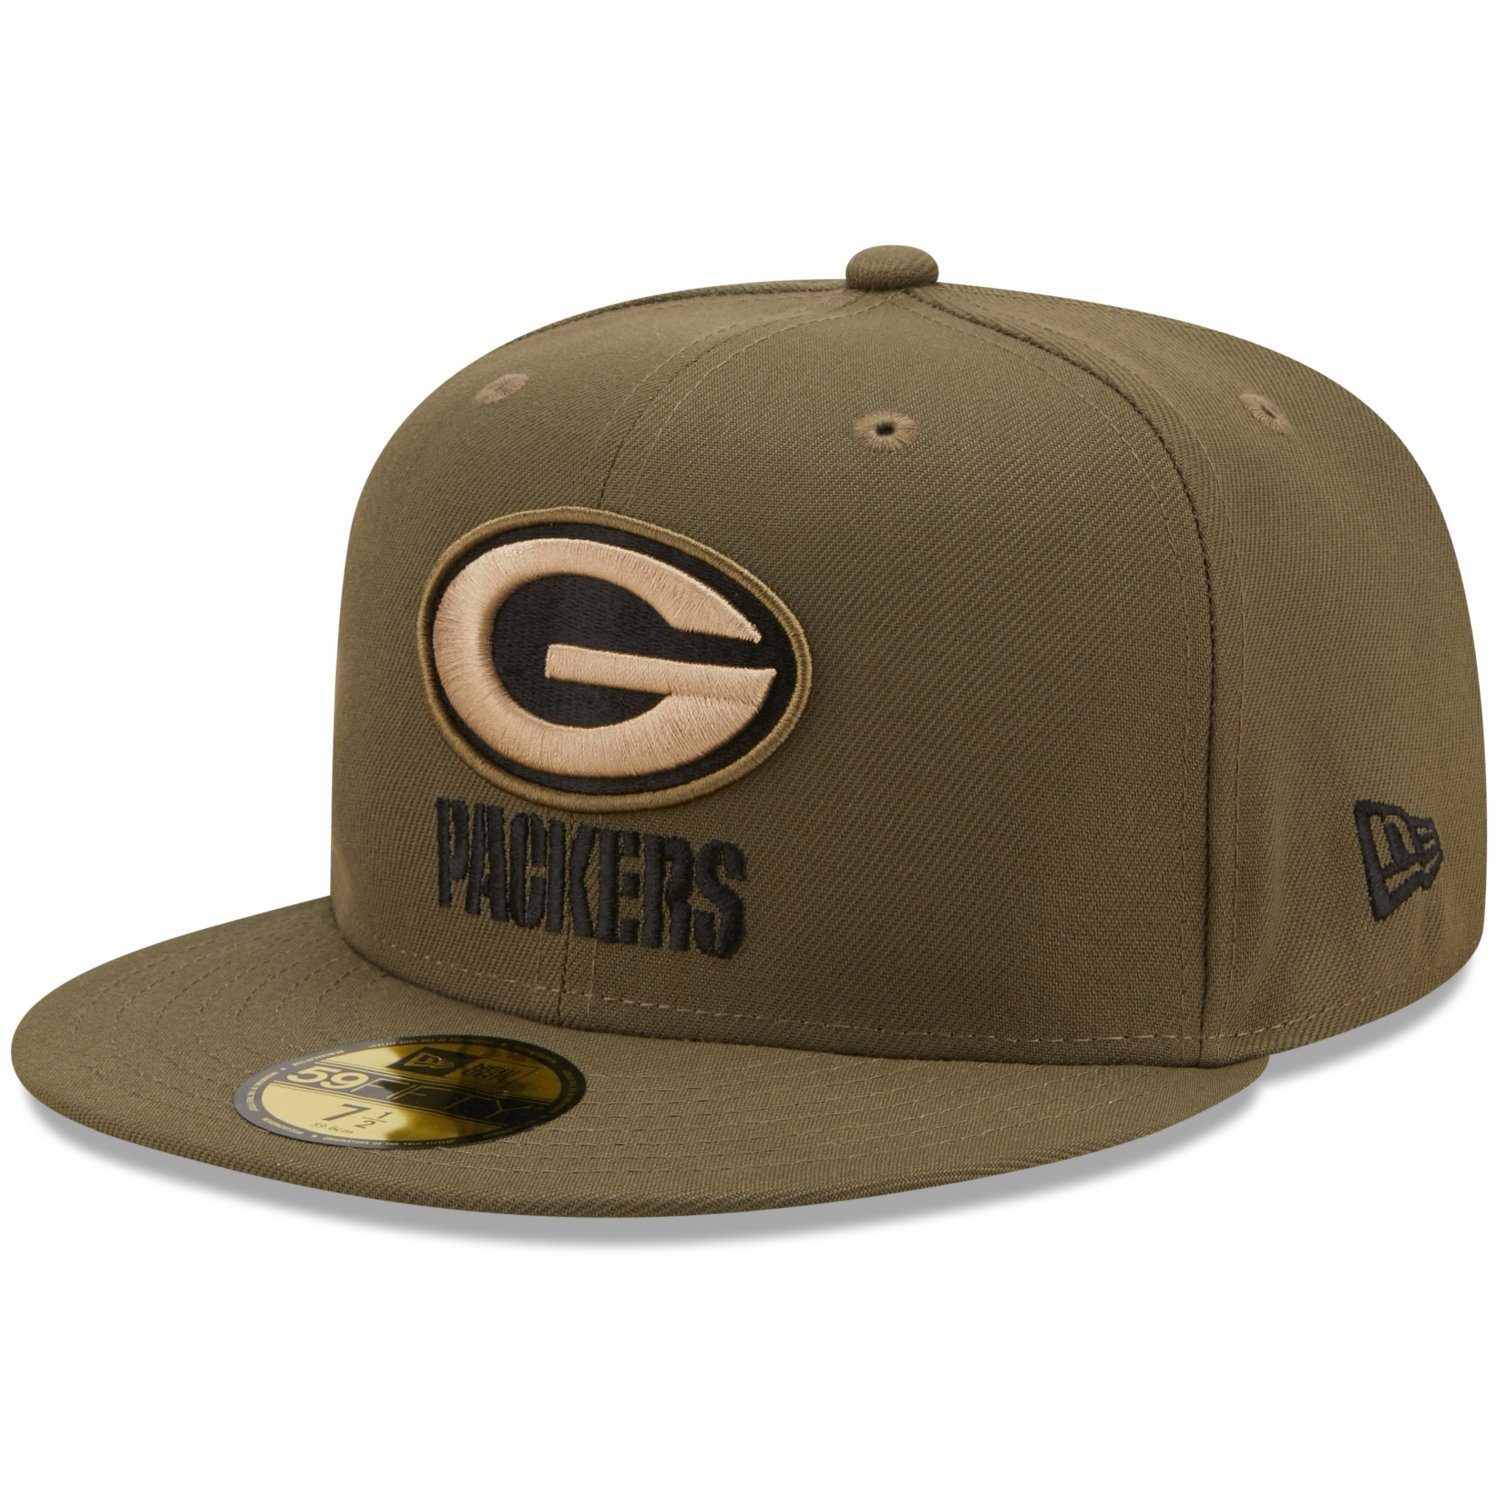 Throwback Packers Superbowl Era New Cap Fitted 59Fifty Bay NFL ProBowl Green